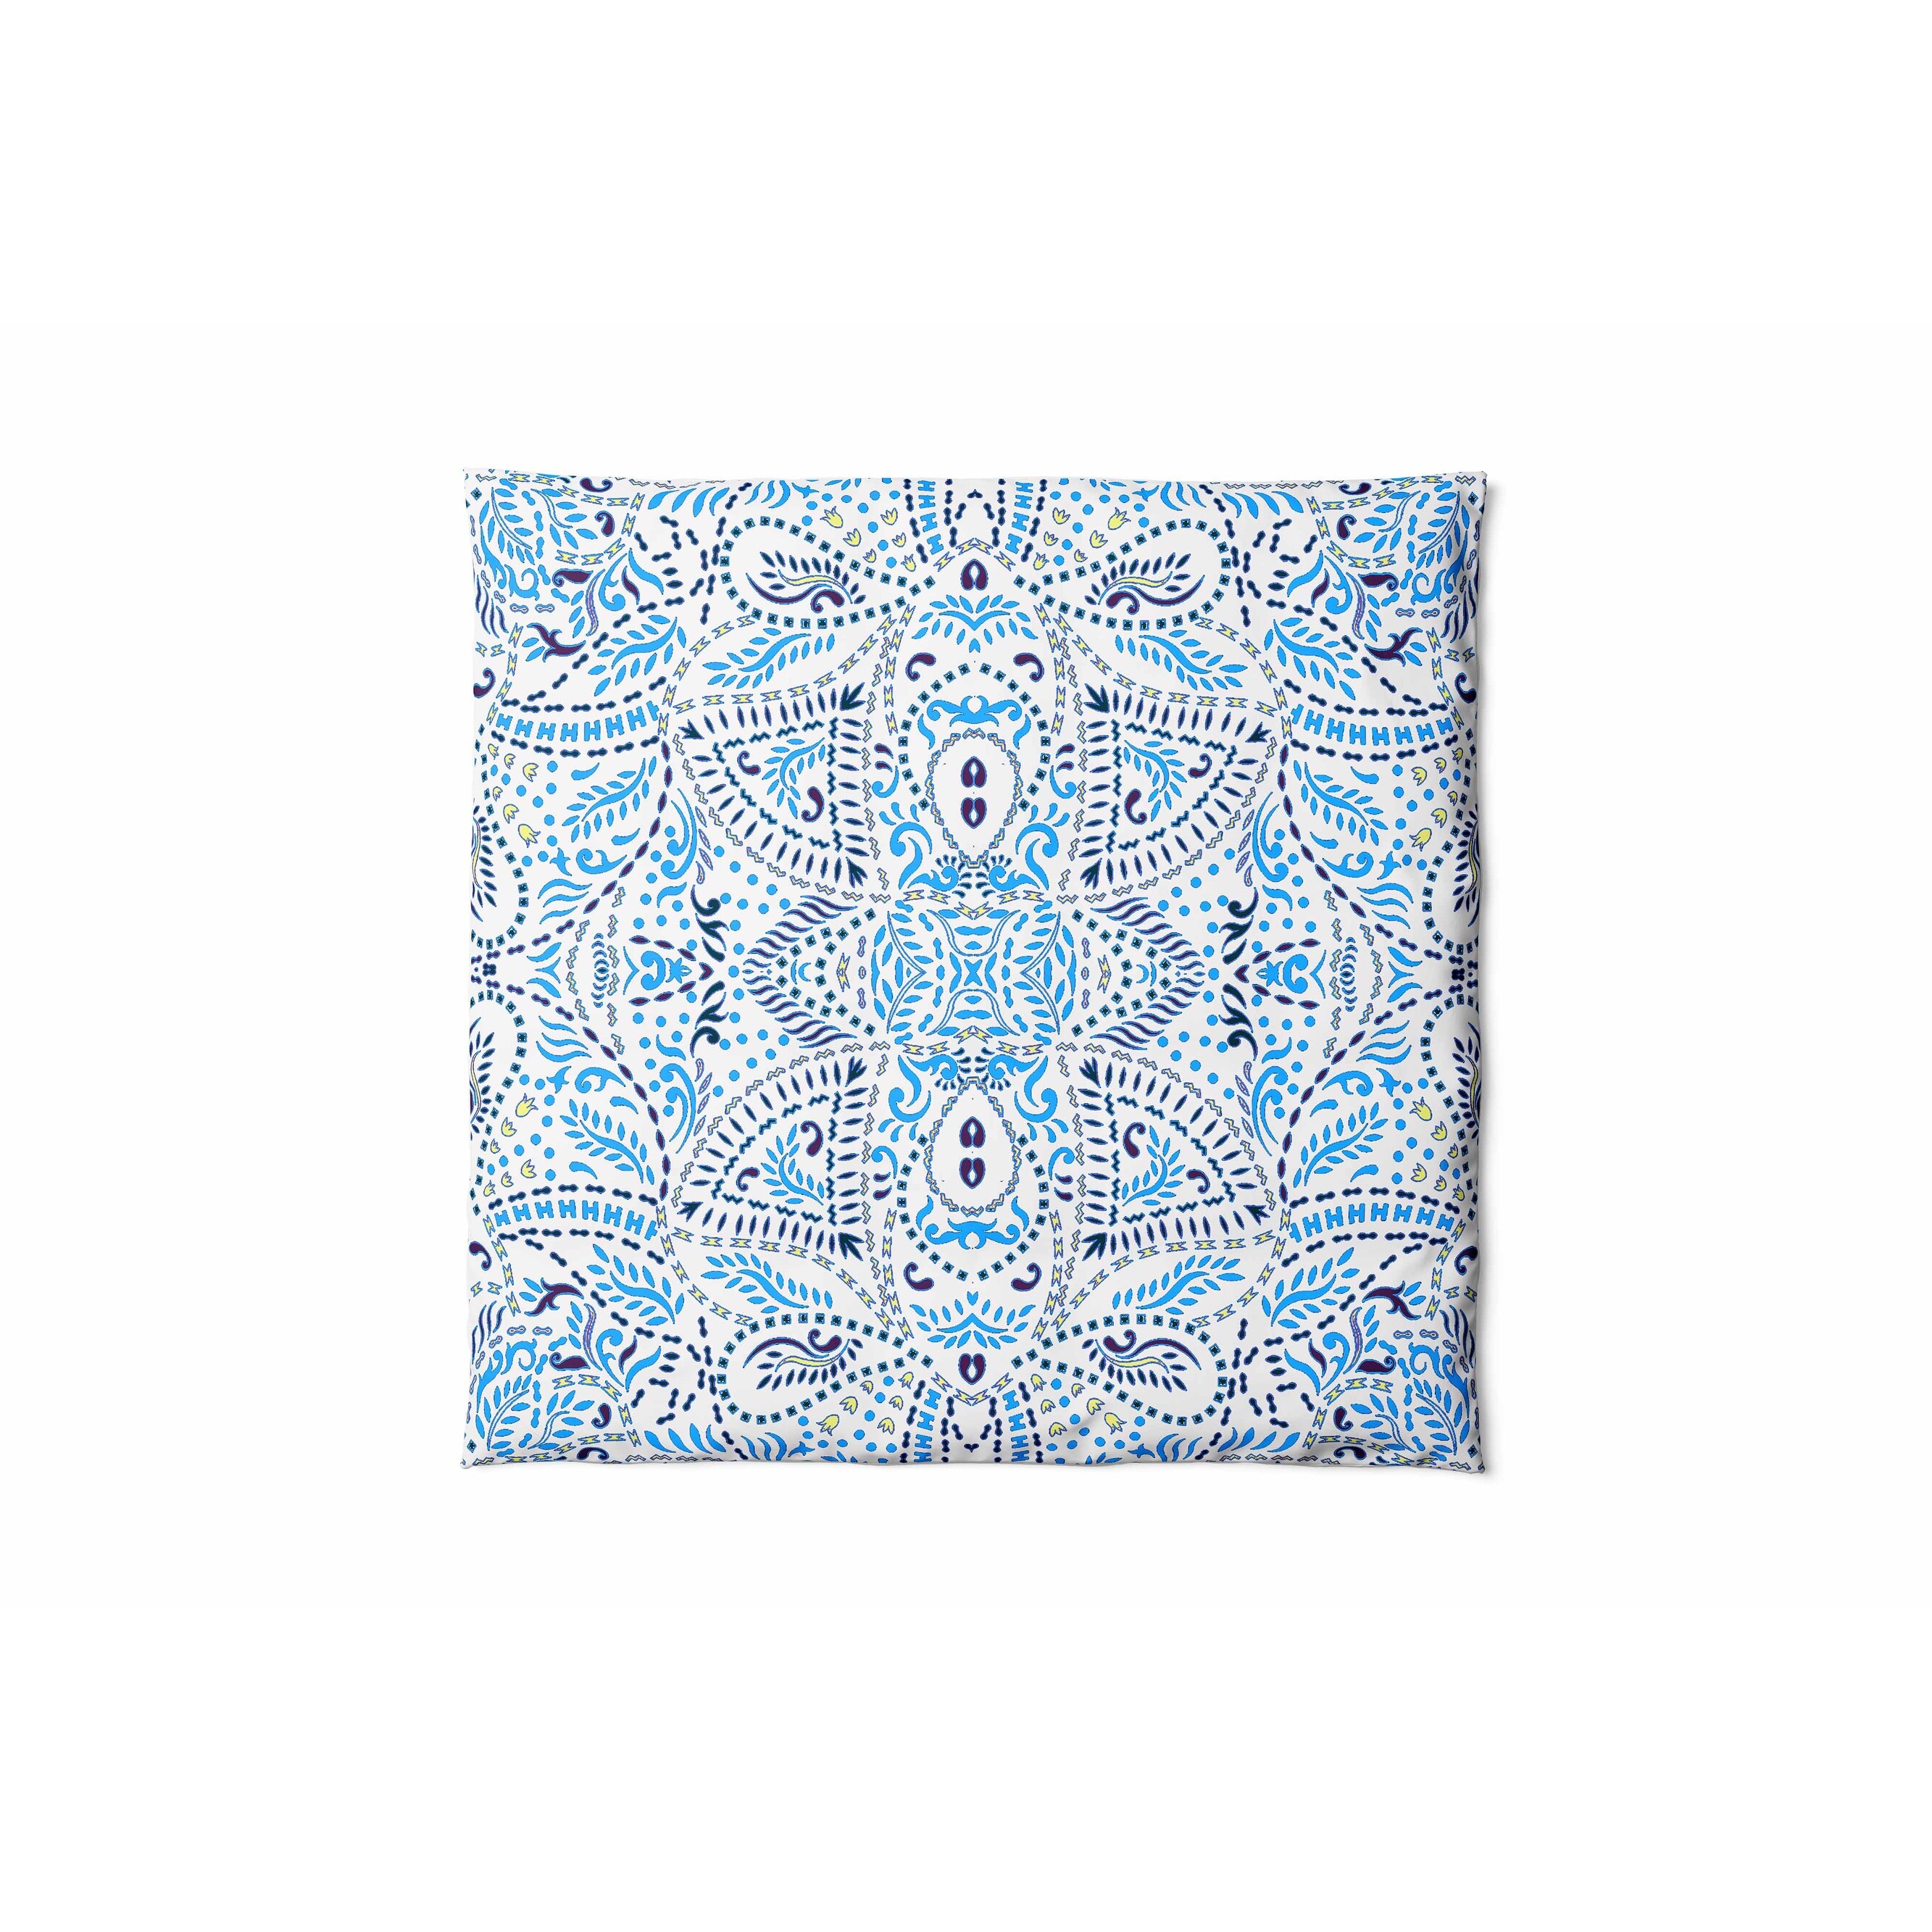 Free People Paisley Duvet Cover in Blue, White, Yellow